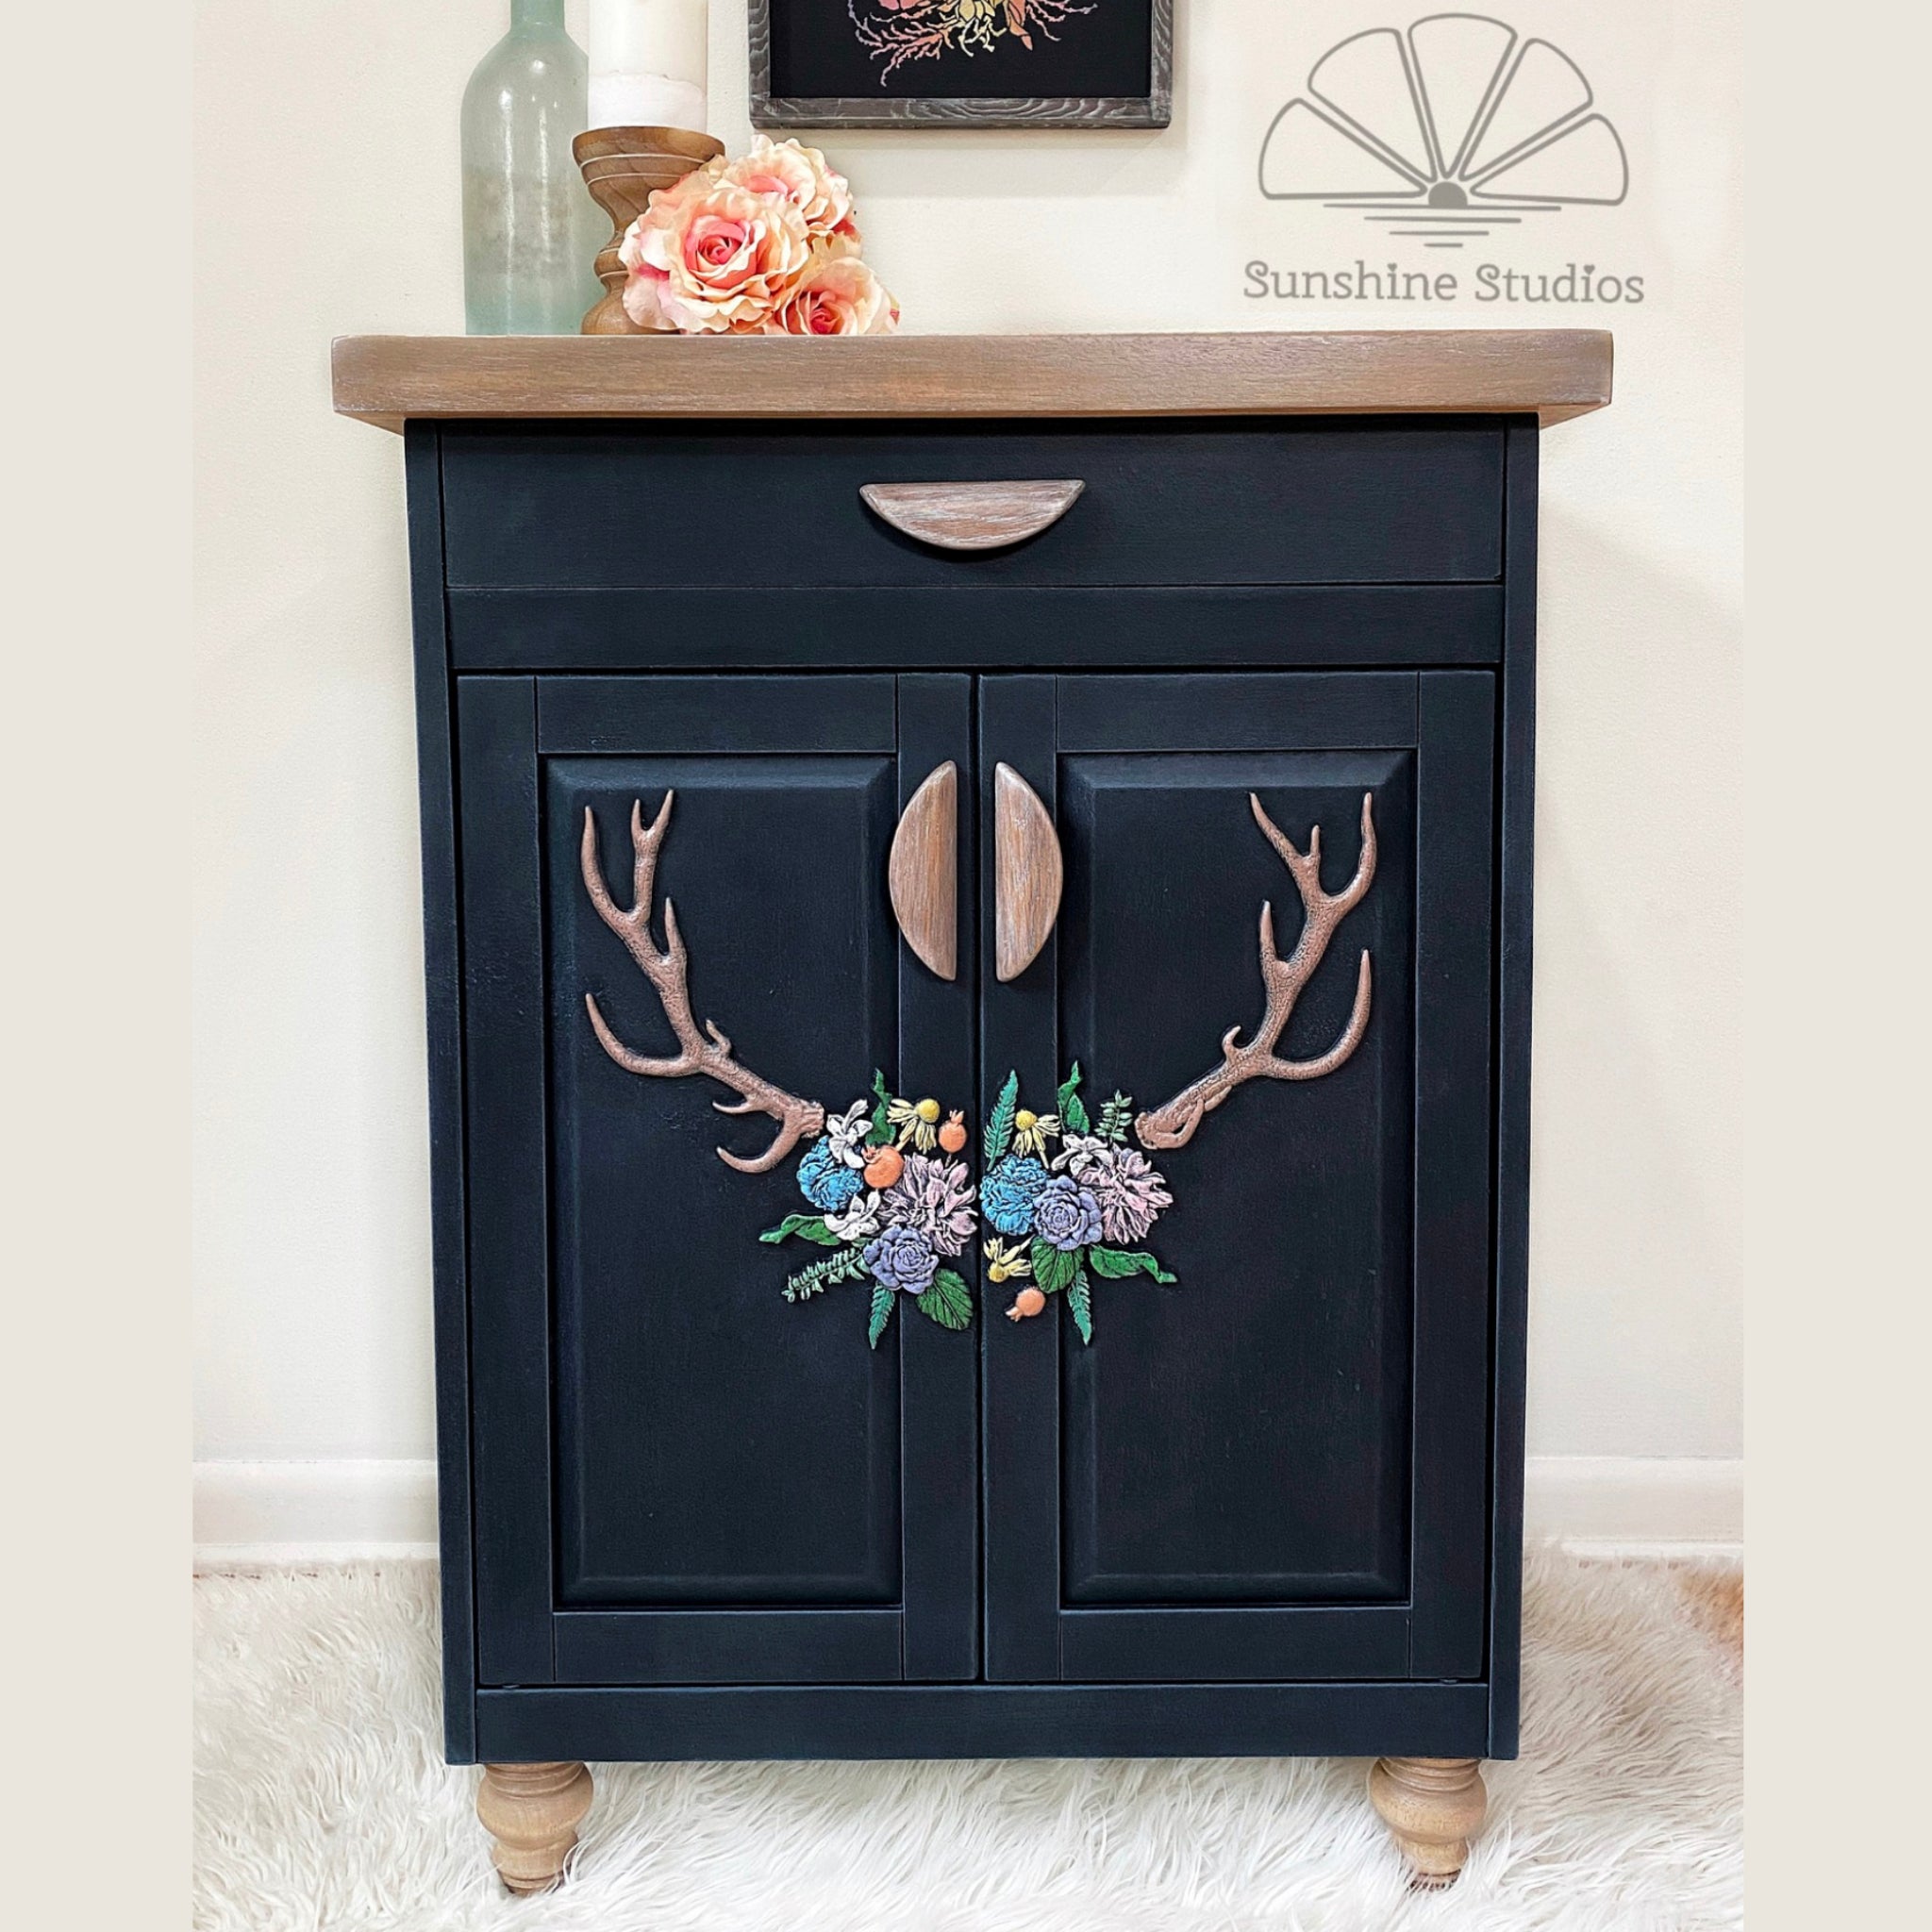 A small buffet cabinet refurbished by Sunshine Studios is painted black with natural wood accents and features ReDesign with Prima's Logger's Lodge silicone moulds on the doors.